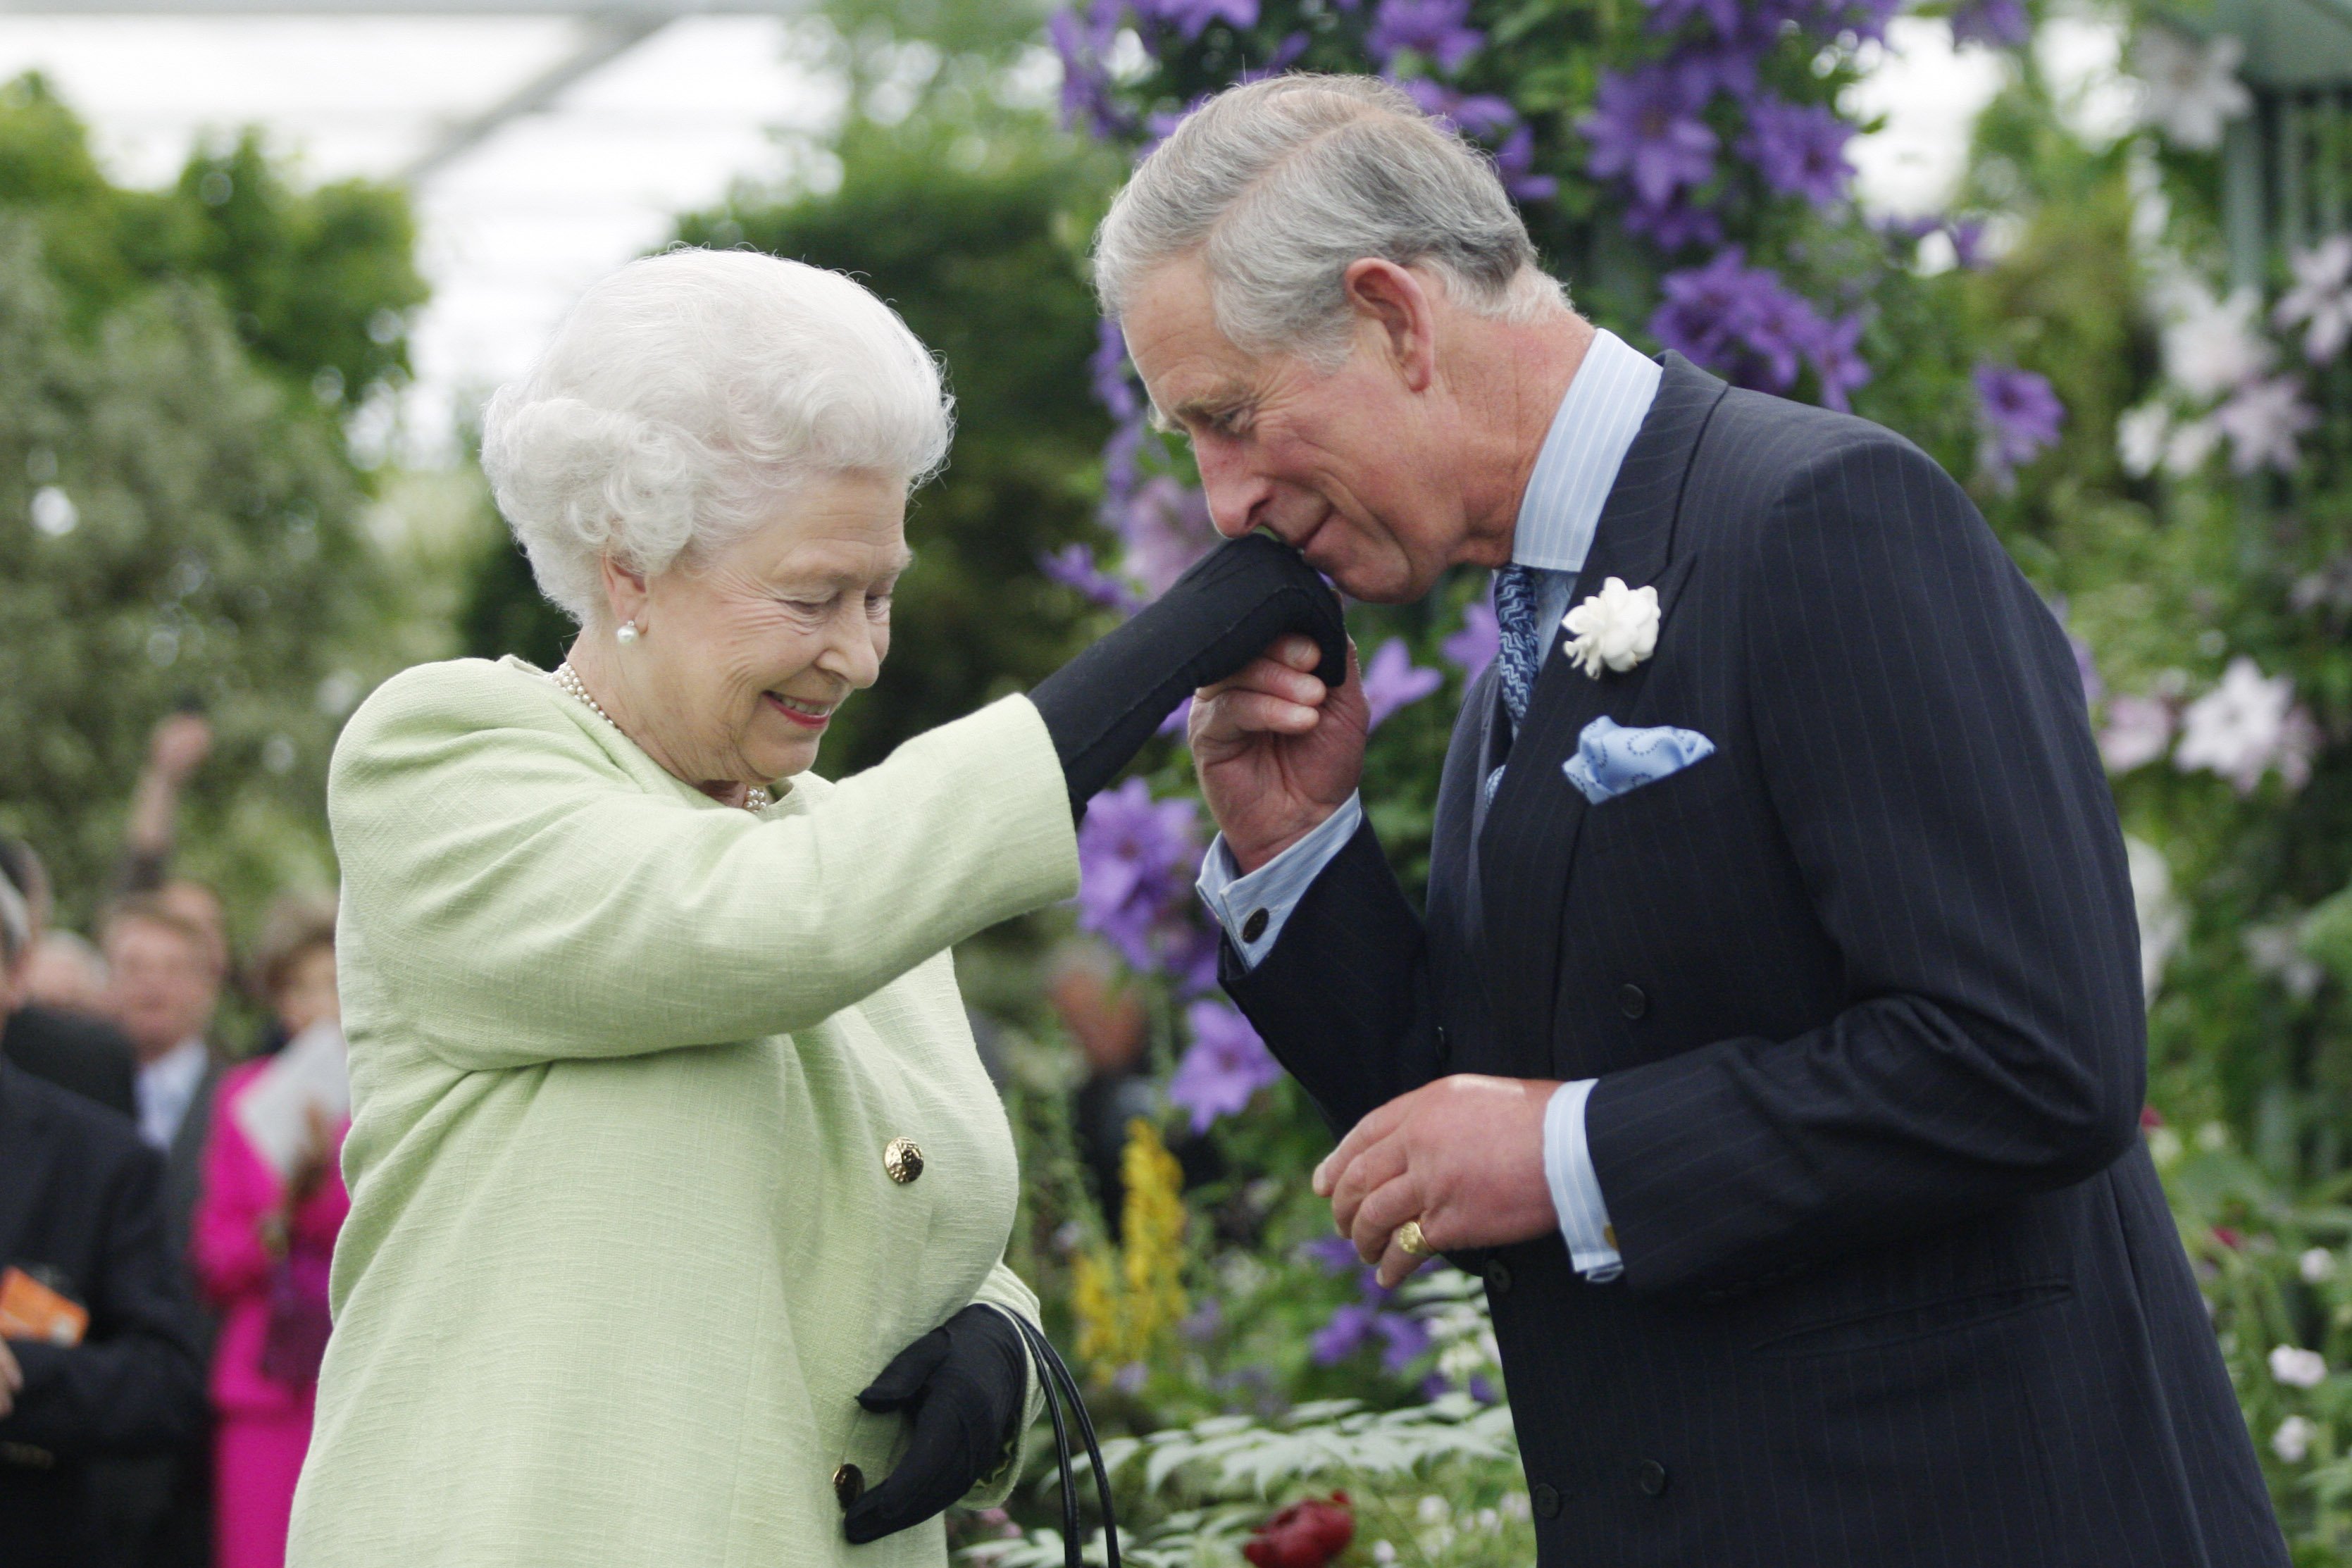 Queen Elizabeth II presents Prince Charles with the Royal Horticultural Society's Victoria Medal of Honor during a visit to the Chelsea Flower Show on May 18, 2009 in London | Source: Getty Images